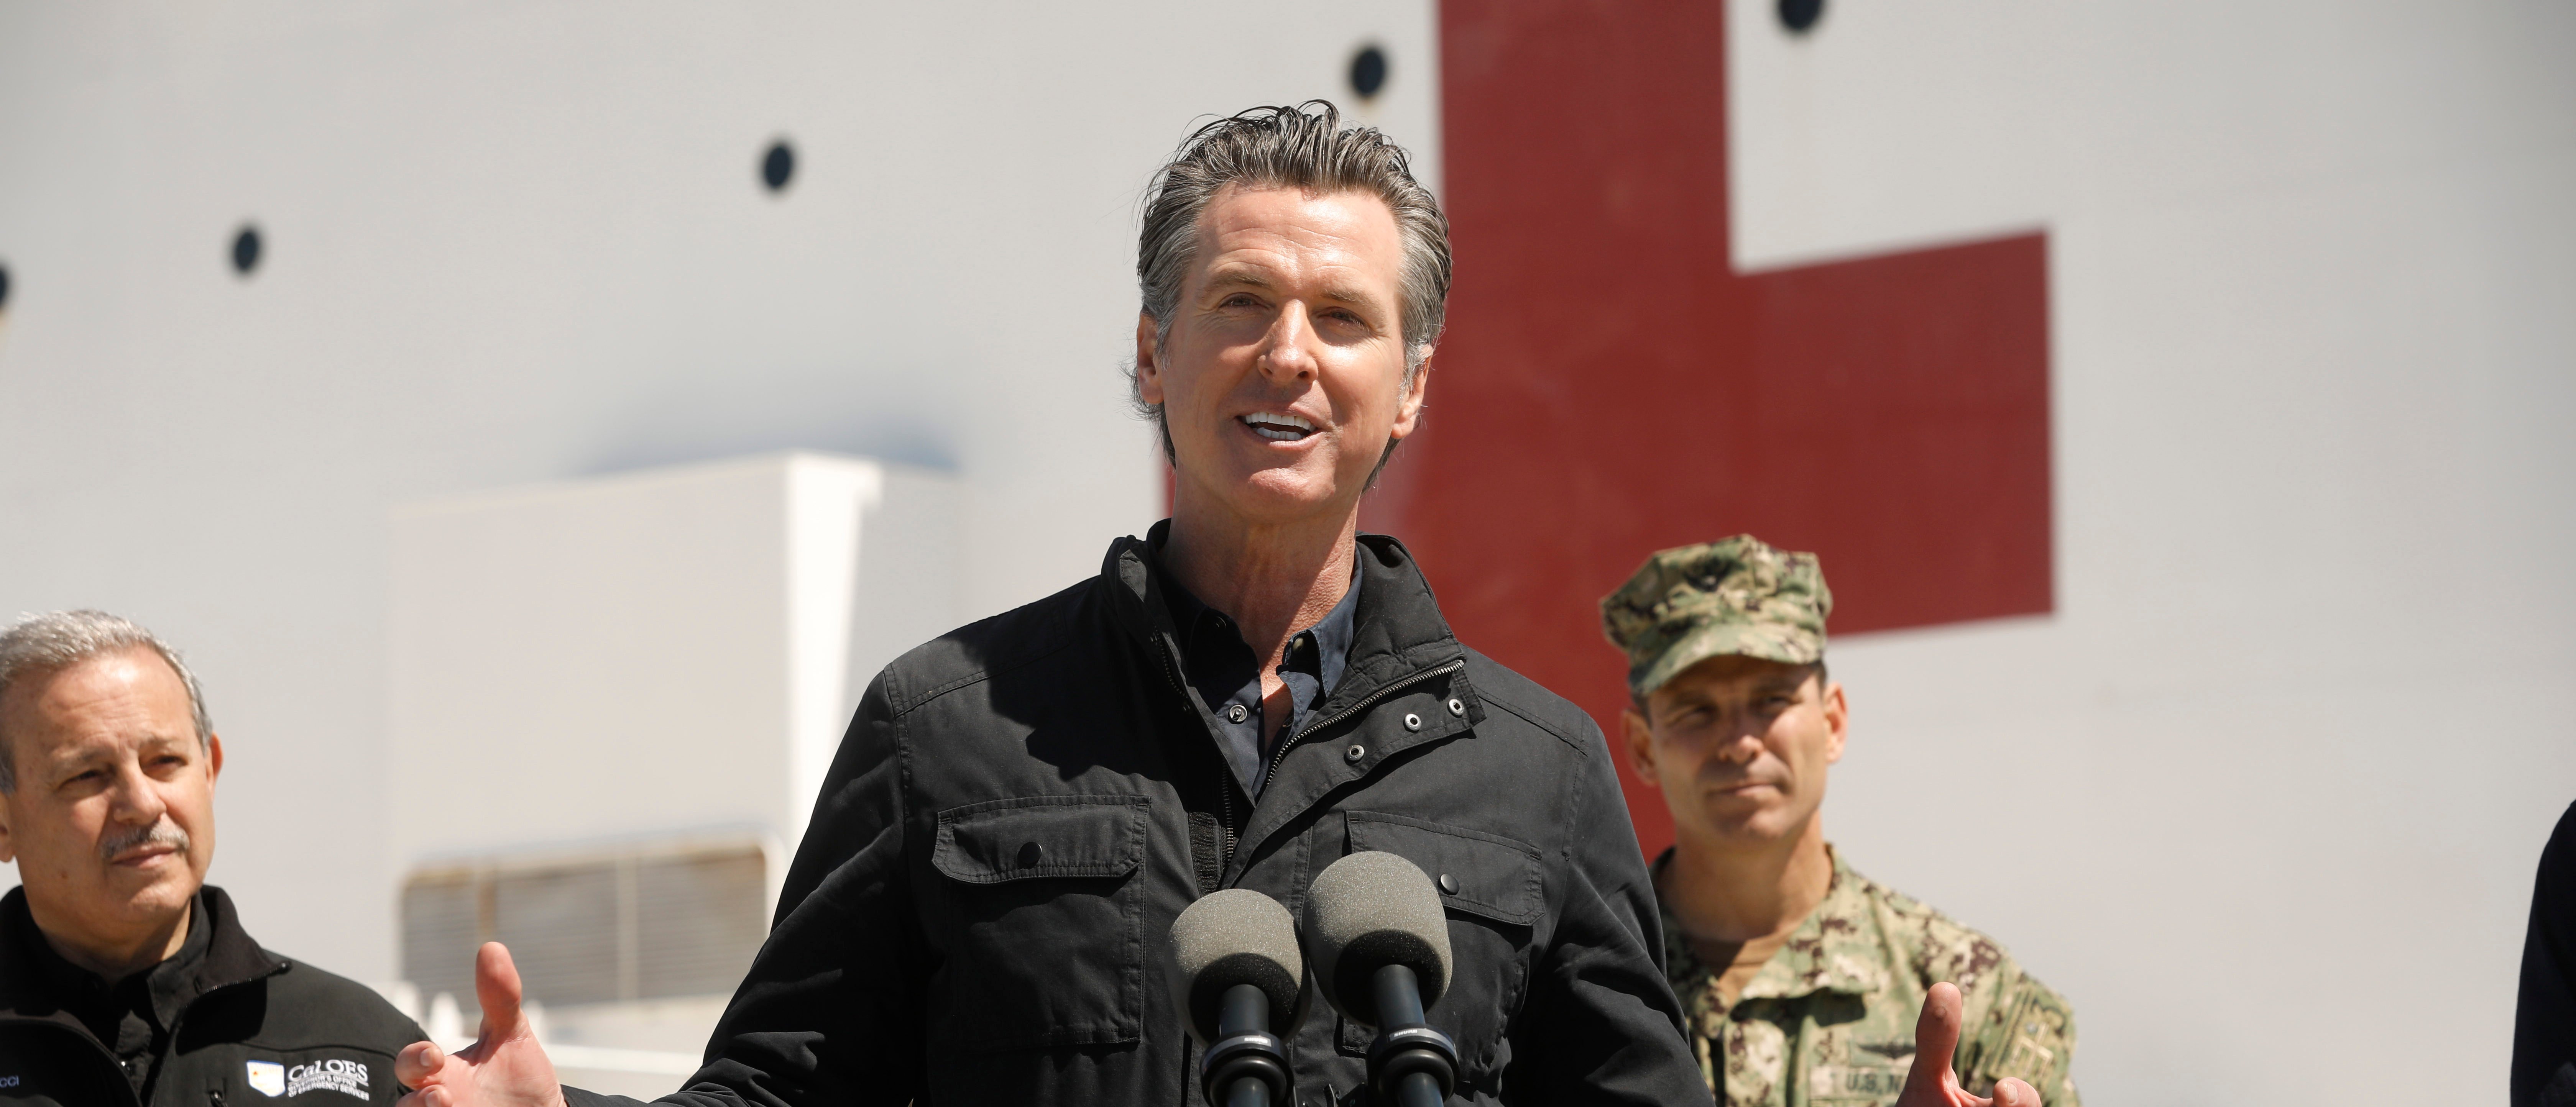 LOS ANGELES, CA - MARCH 27: California Governor Gavin Newsom speaks in front of the hospital ship USNS Mercy that arrived into the Port of Los Angeles on Friday, March 27, 2020, to provide relief for Southland hospitals overwhelmed by the coronavirus pandemic. Also attending the press conference were Director Mark Ghilarducci, Cal OES, left, Admiral John Gumbleton, United States Navy, right, and many others not shown including Mayor Eric Garcetti and Dr. Mark Ghaly, Secretary of Health and Human Services. (Photo by Carolyn Cole-Pool/Getty Images)